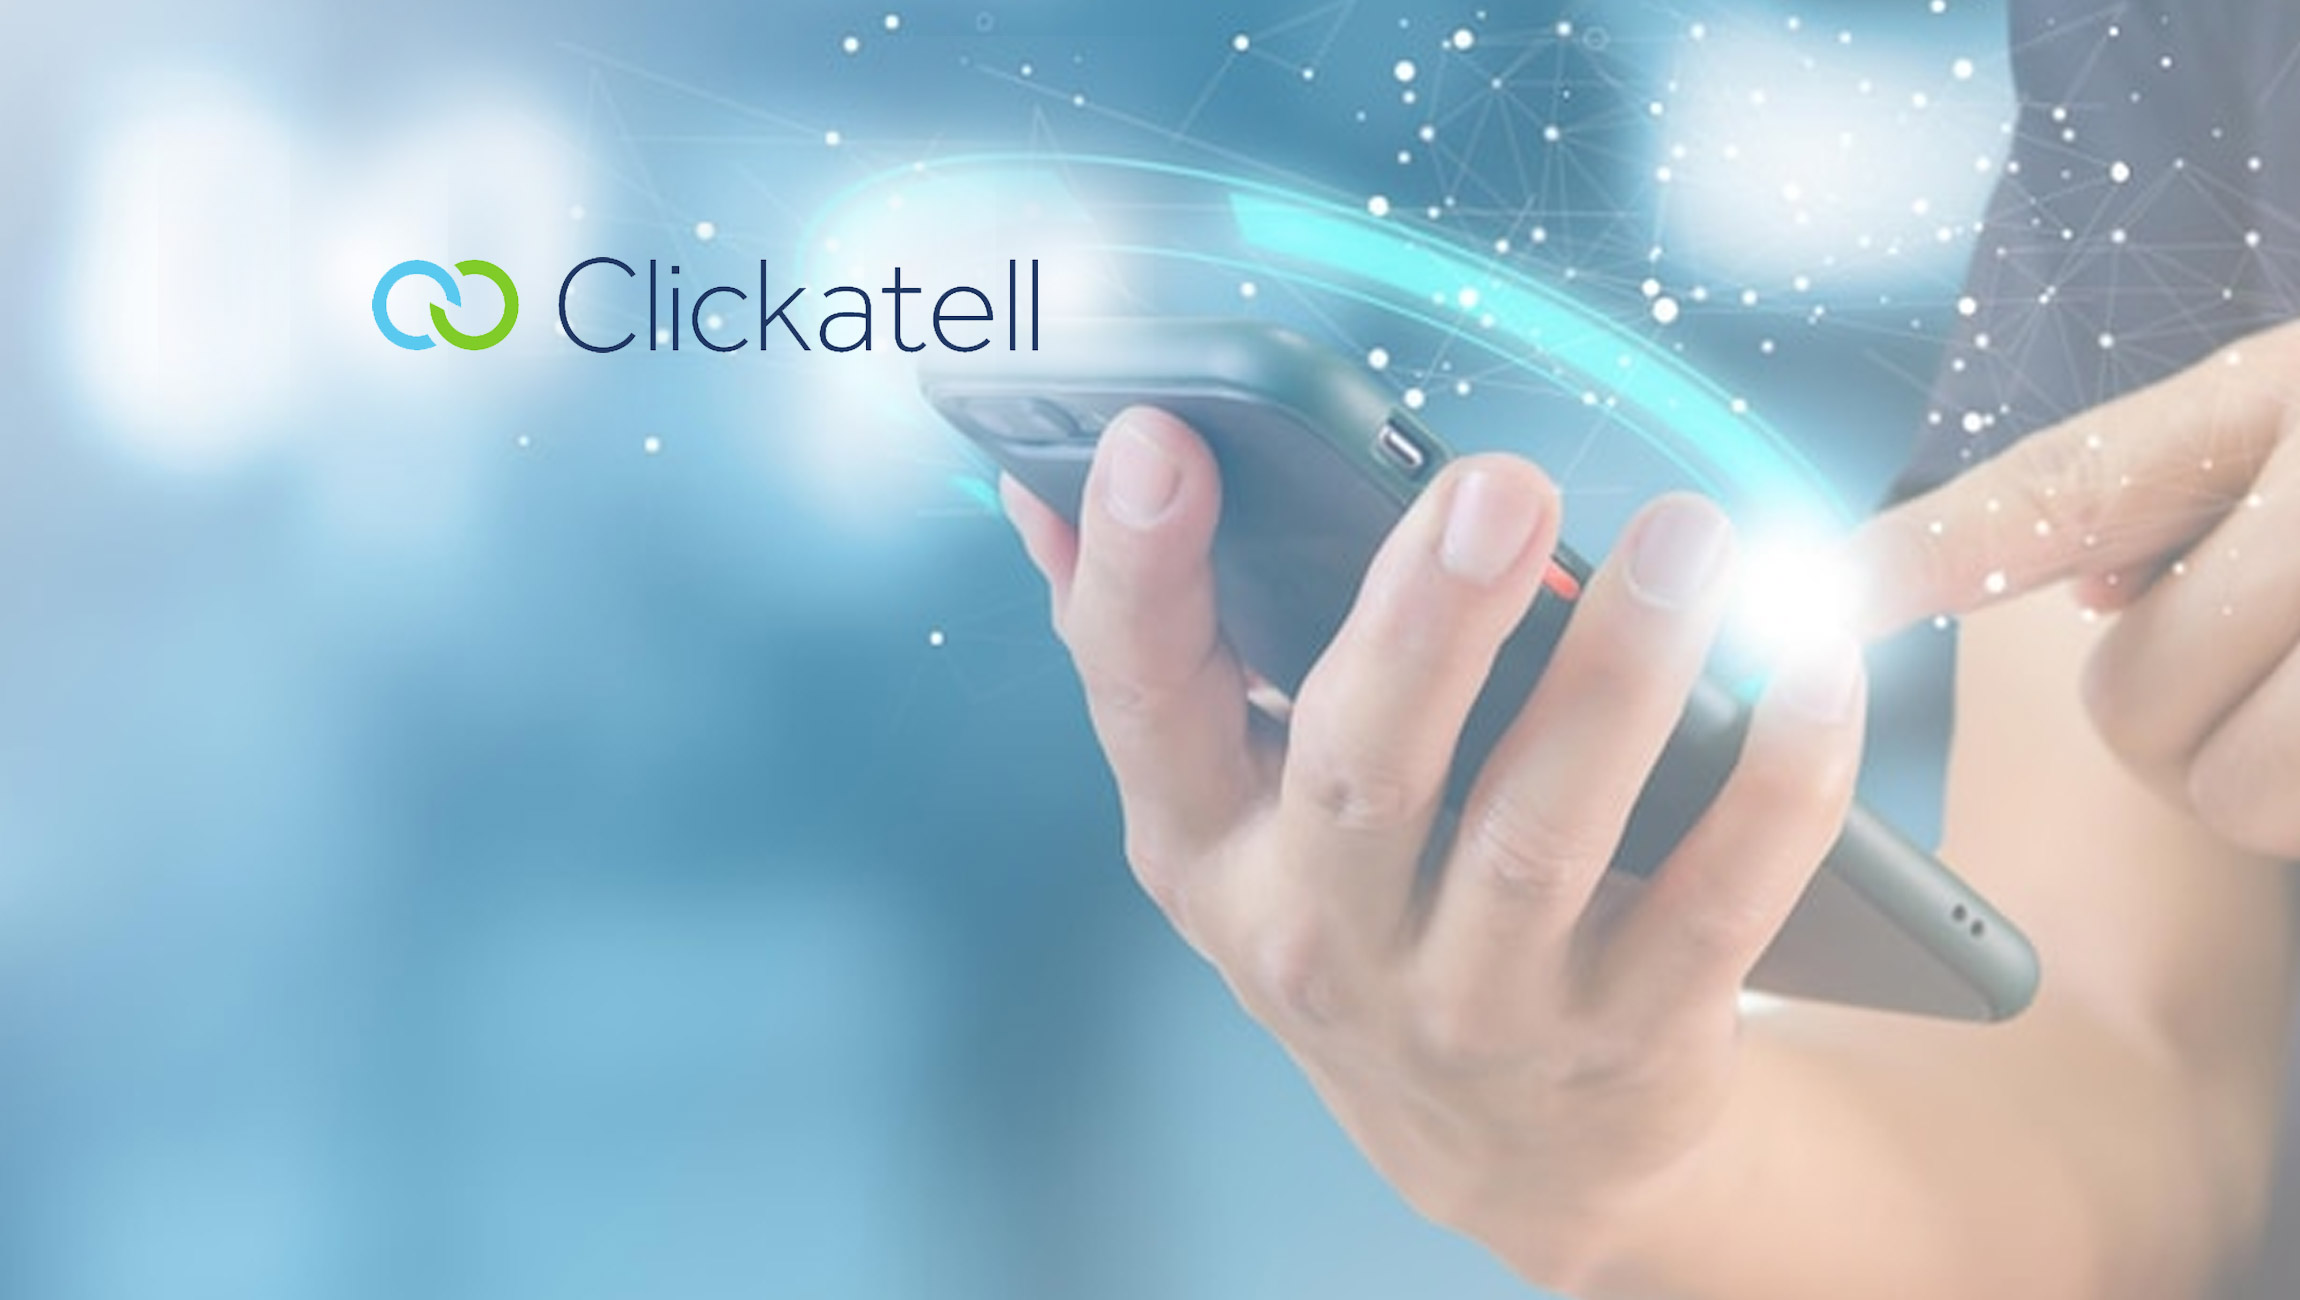 Clickatell’s Connect Interact and Transact (CIT) Event in Joburg Reveals How Chat Commerce Is Sparking a Convenience Revolution 1